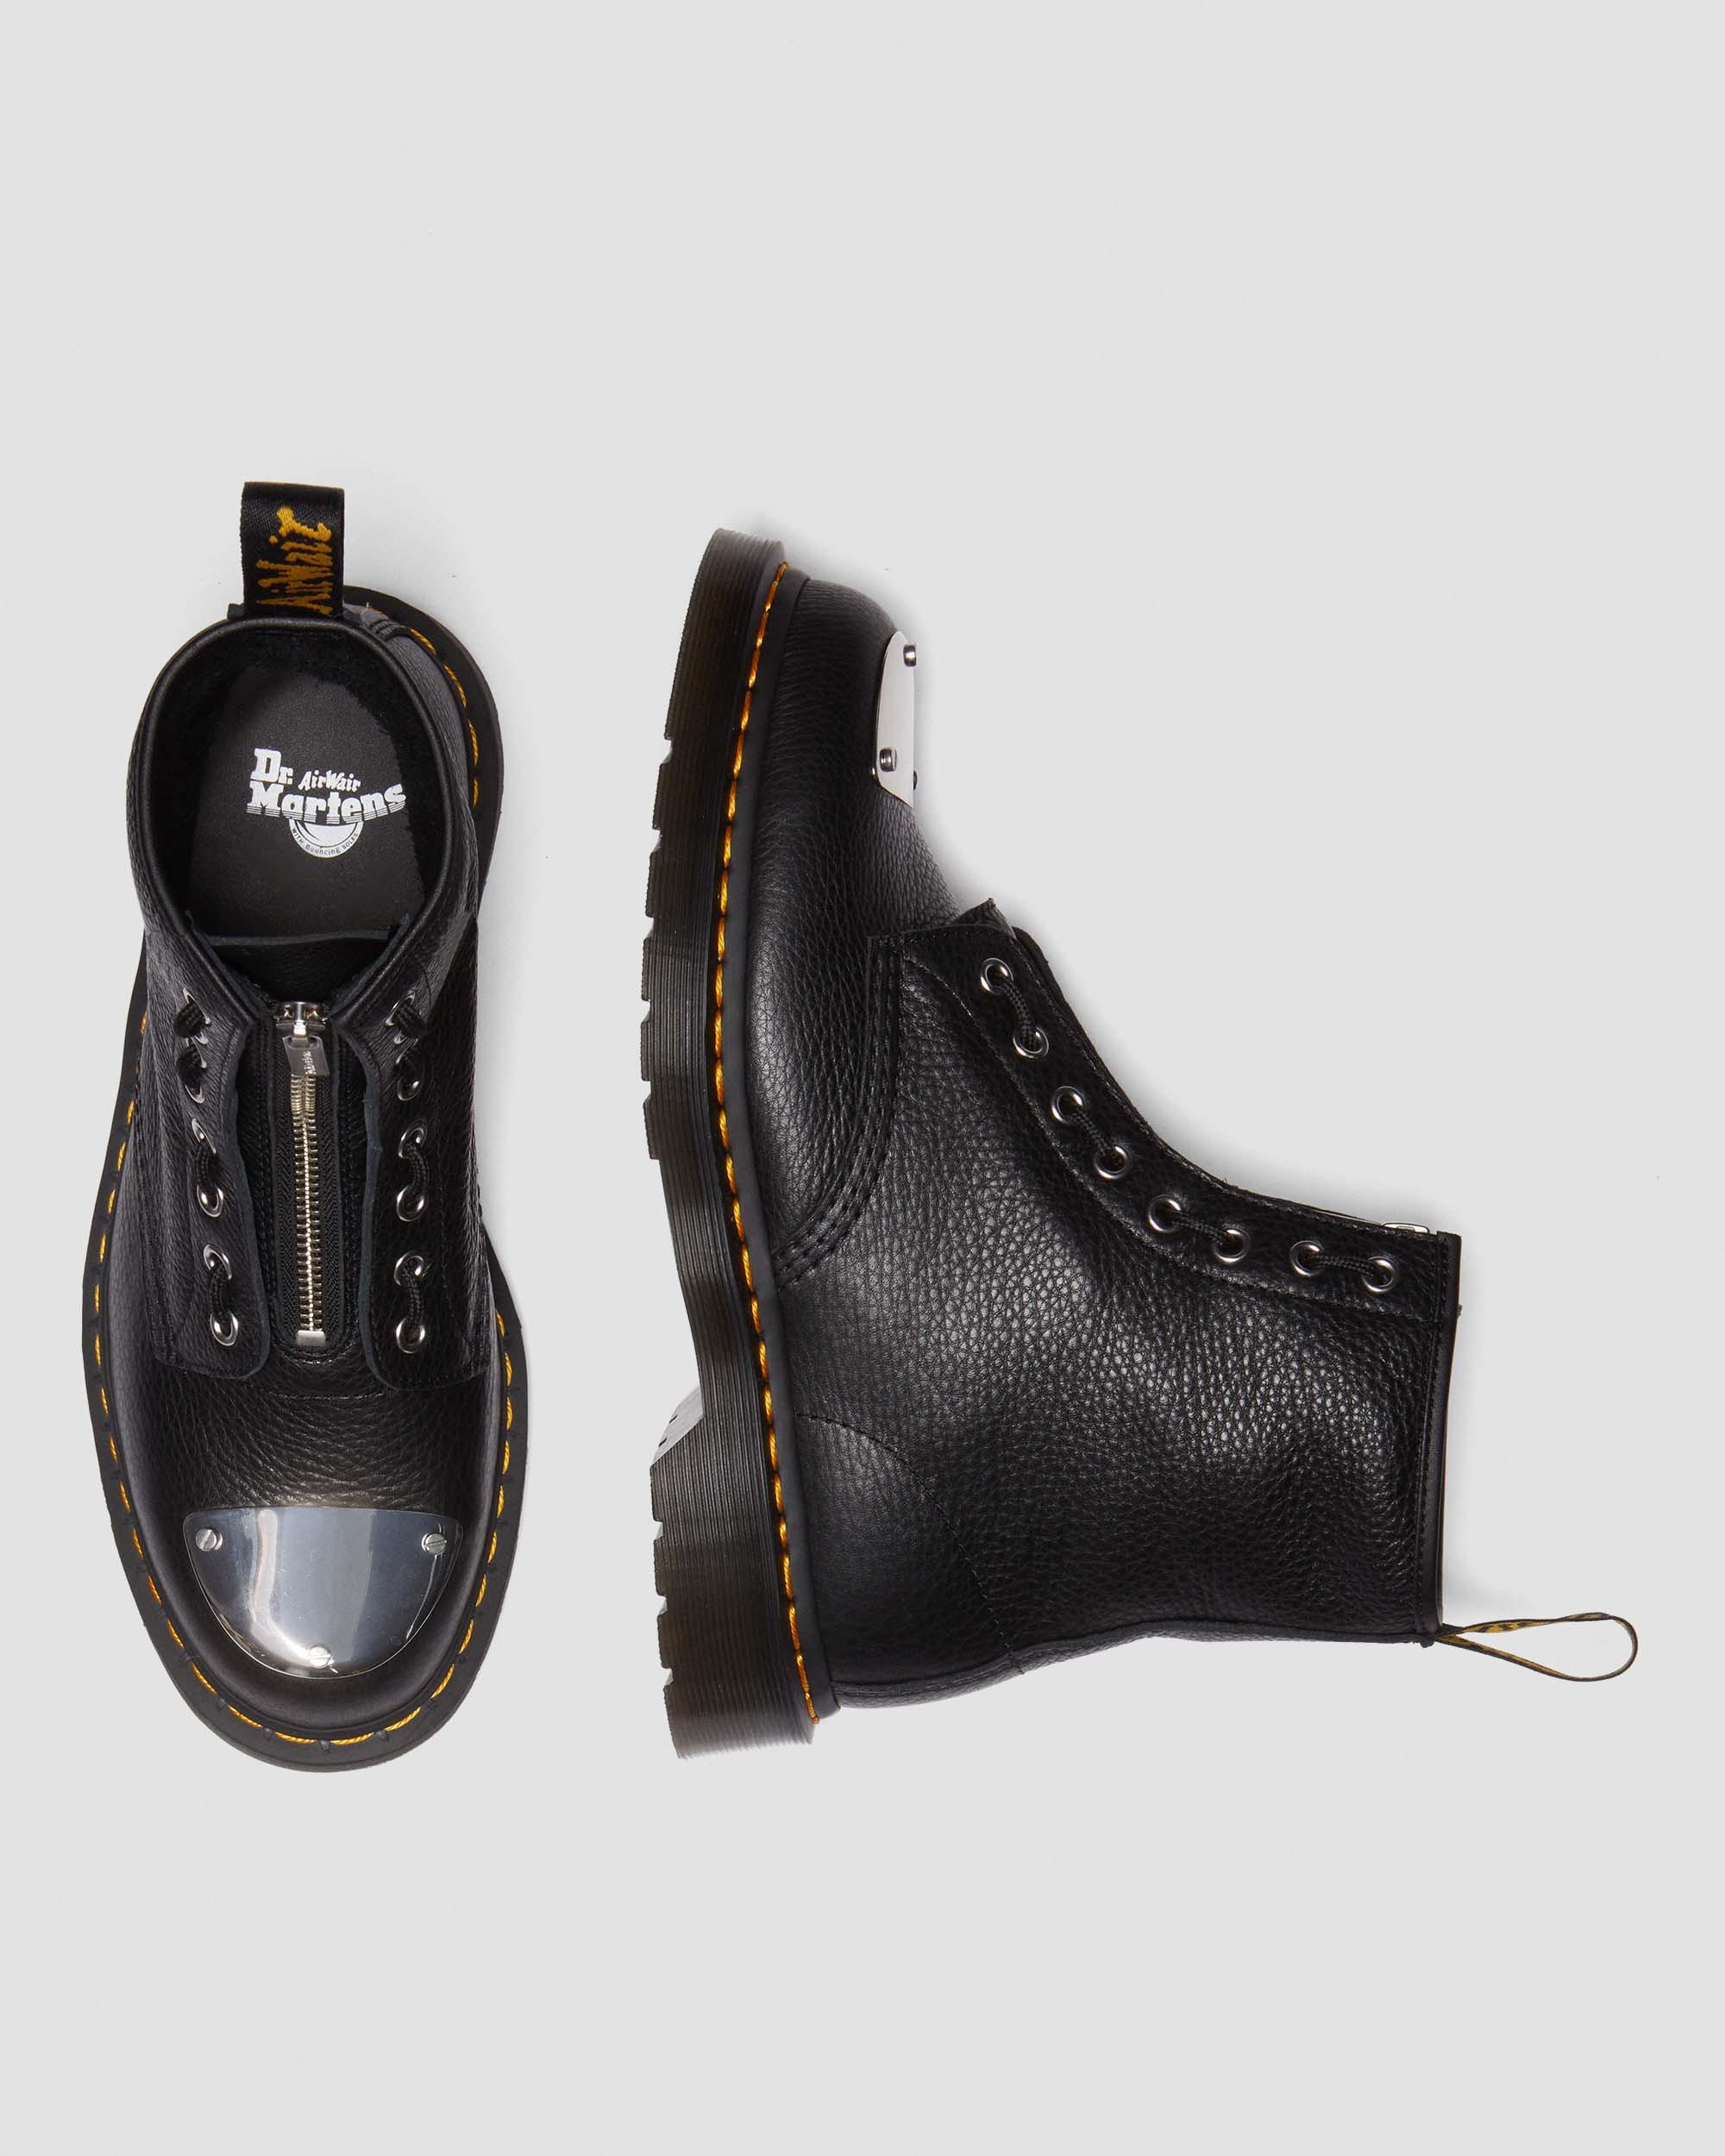 1460 Toe Plate Lunar Leather Jungle Zip Boots in Black | Dr. Martens